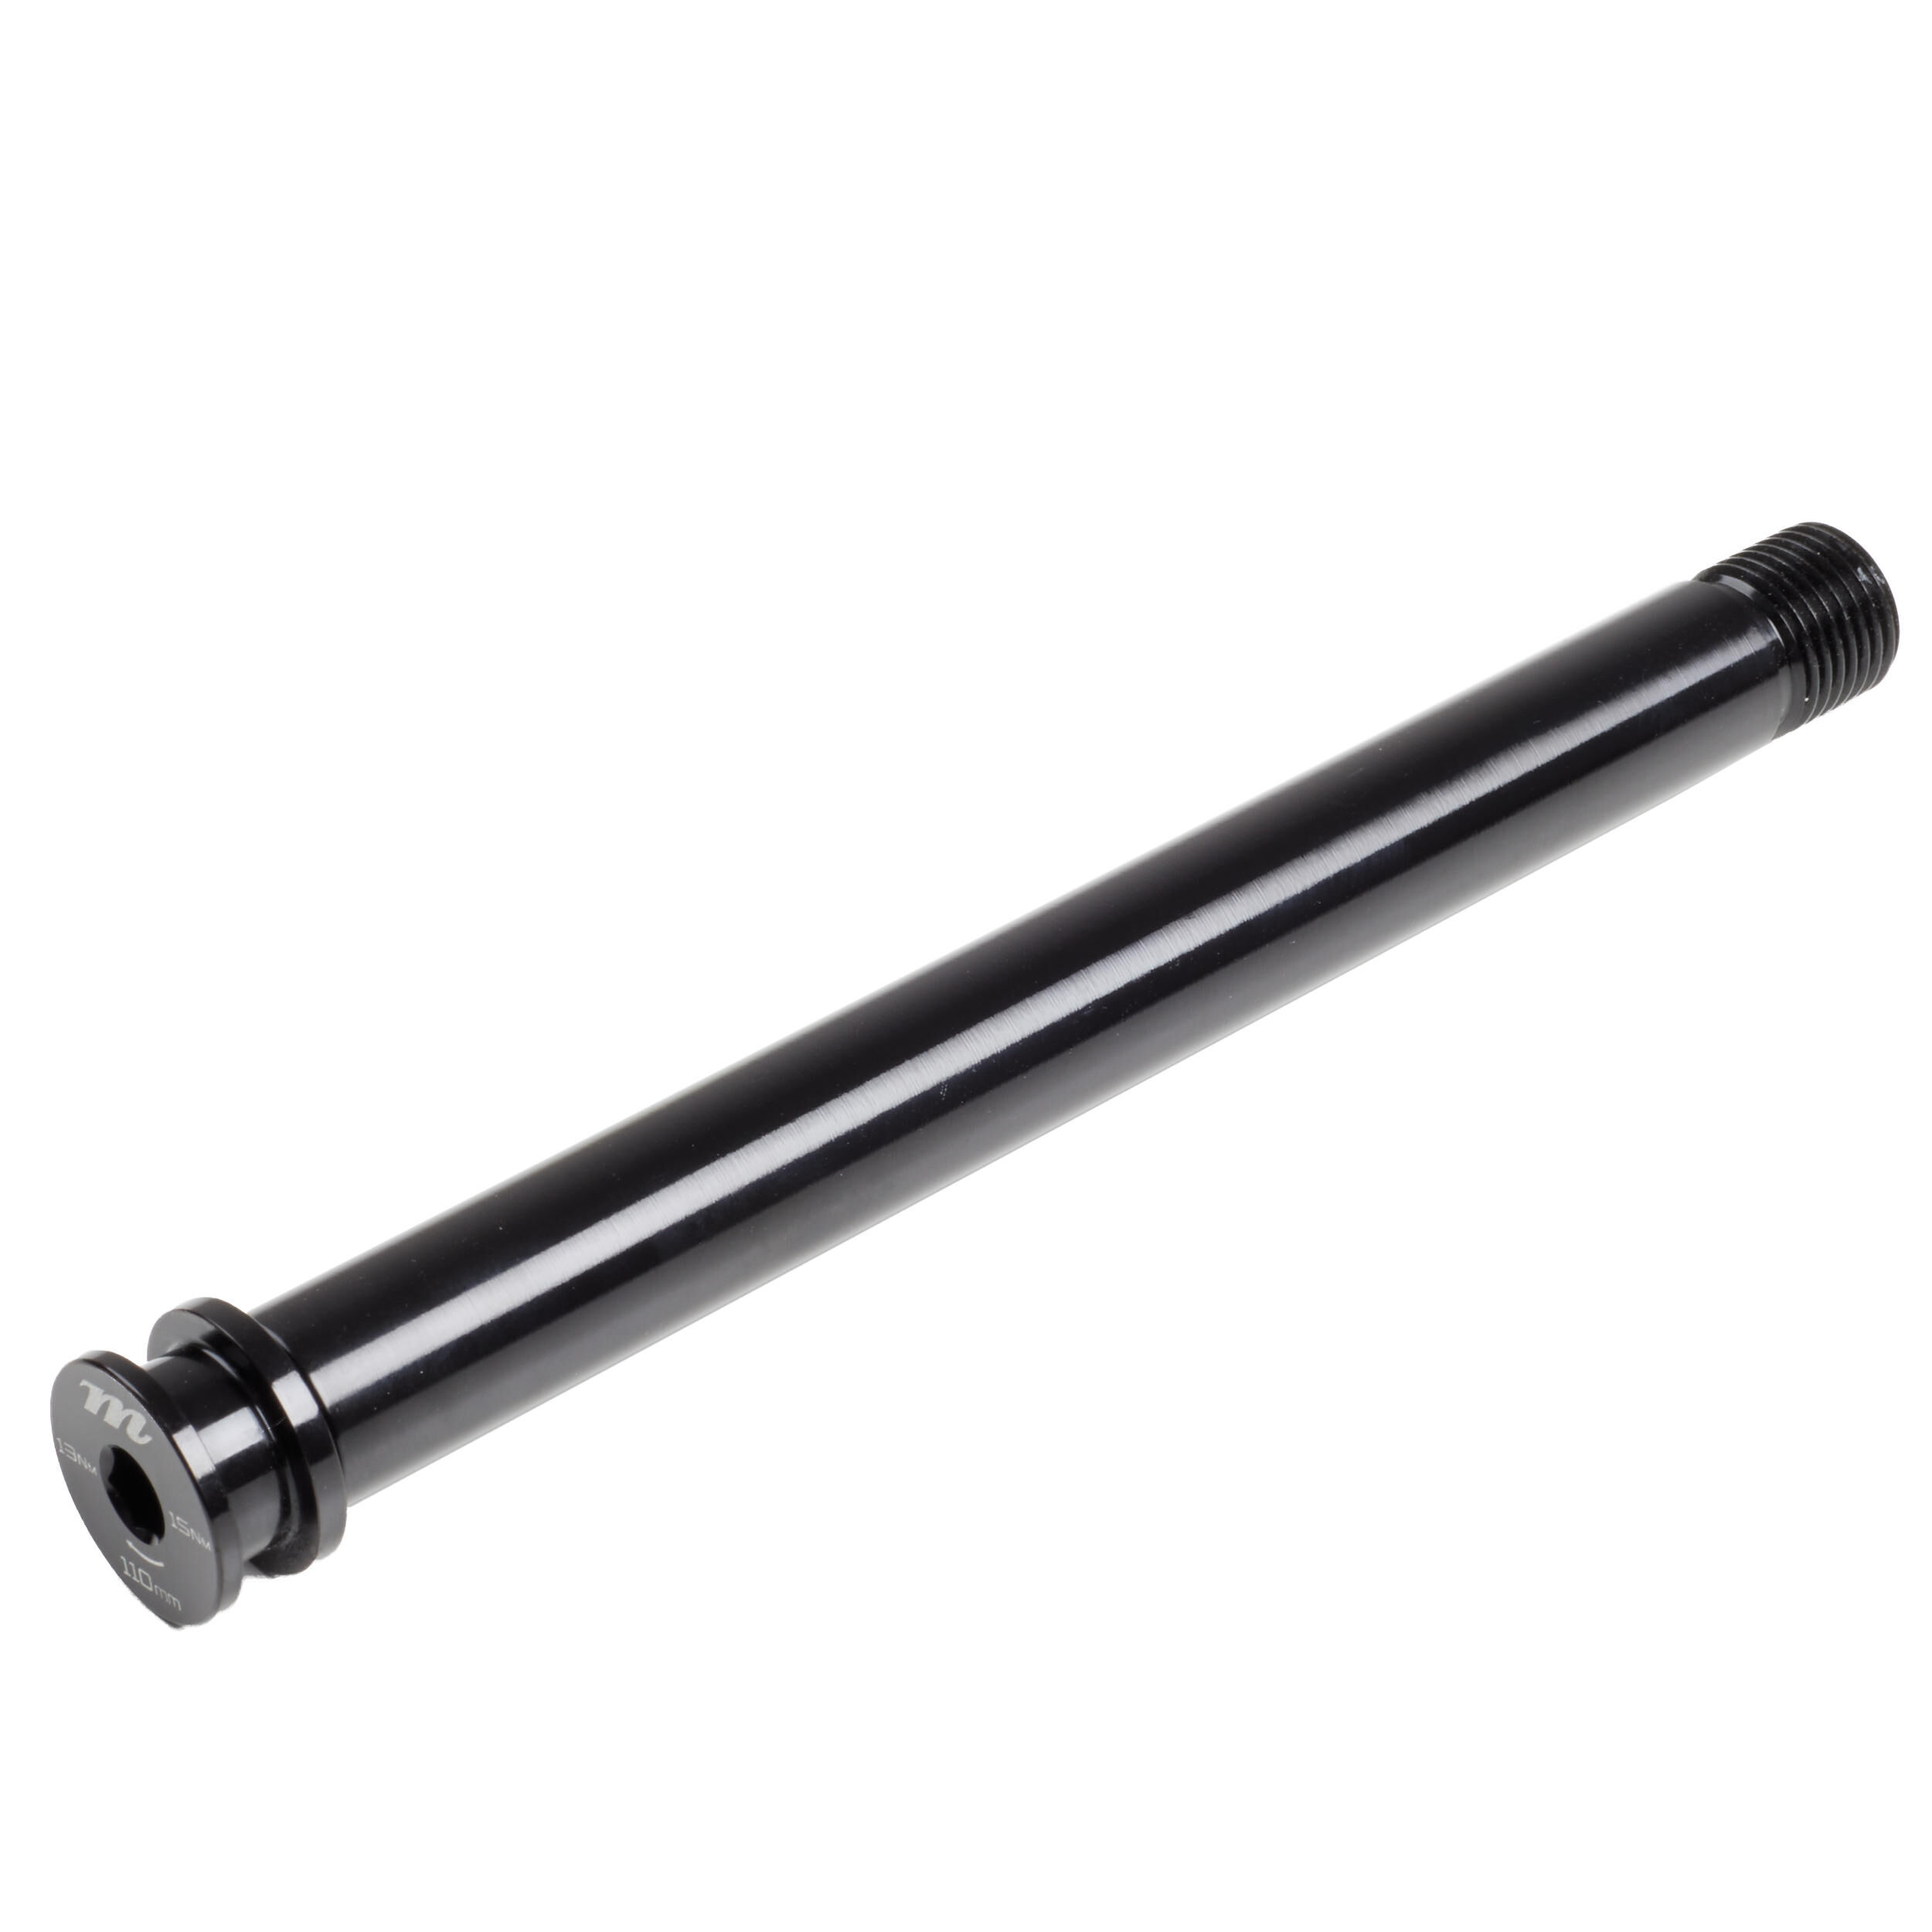 MANITOU 15x110 mm Front Thru Axle for Manitou Markhor Fork